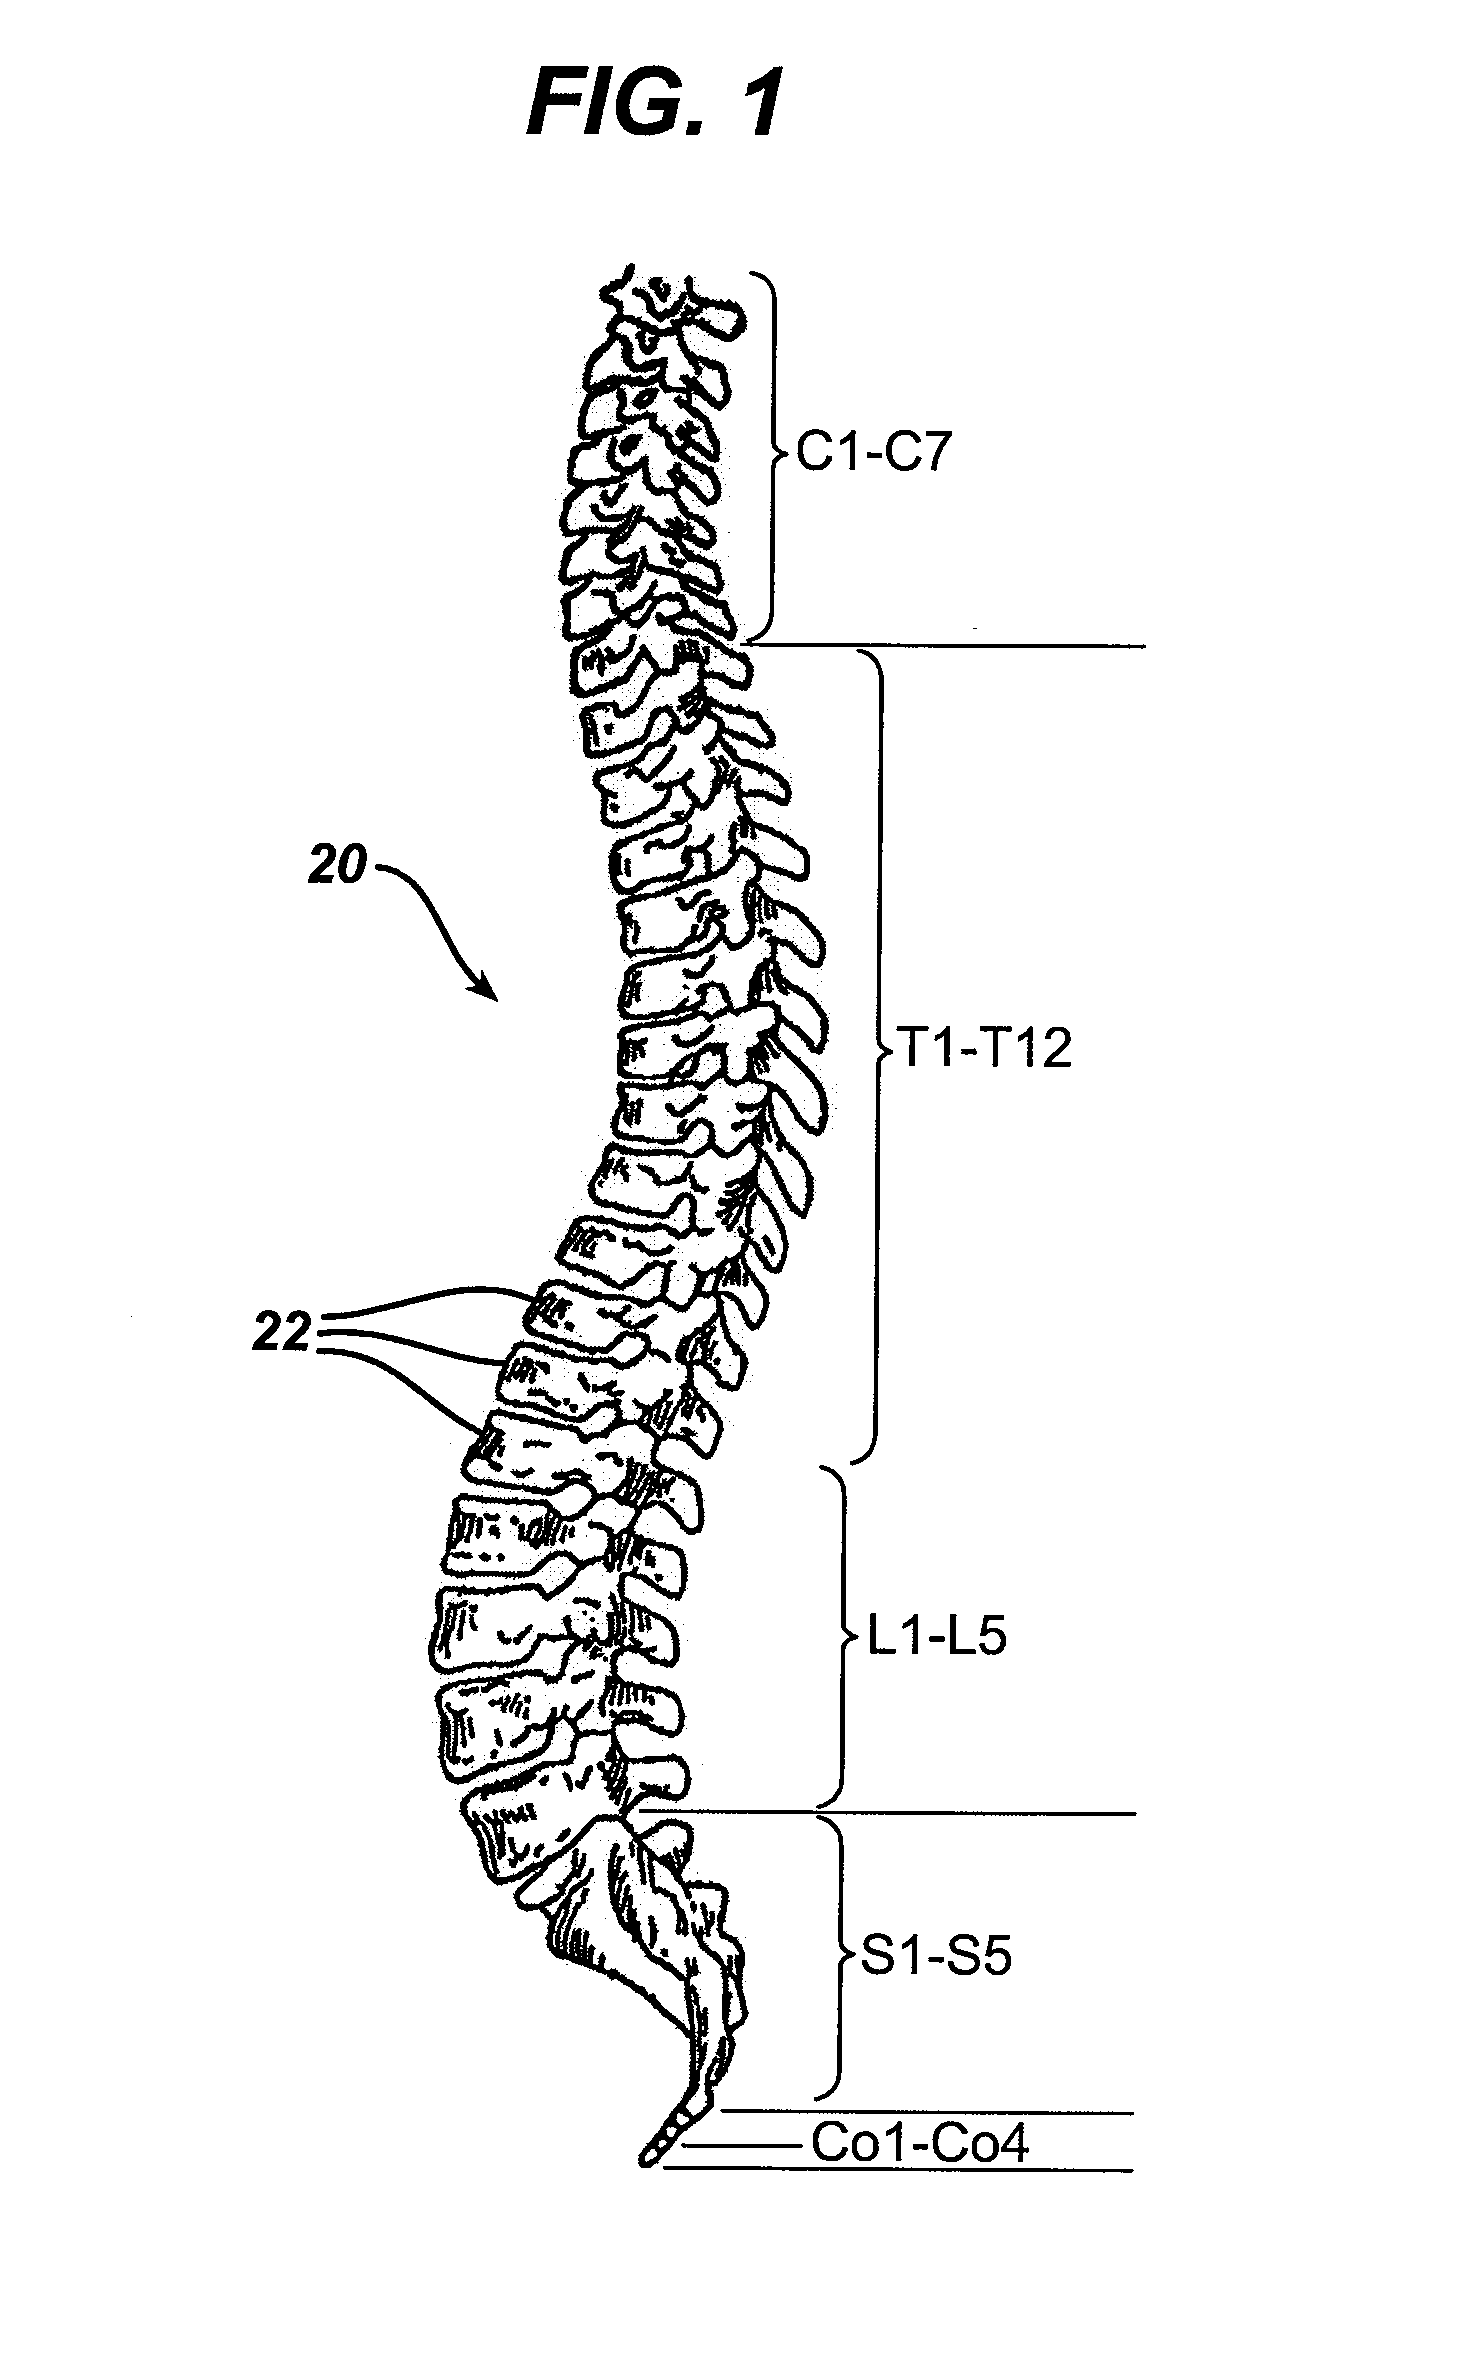 Intra-facet fixation device and method of use